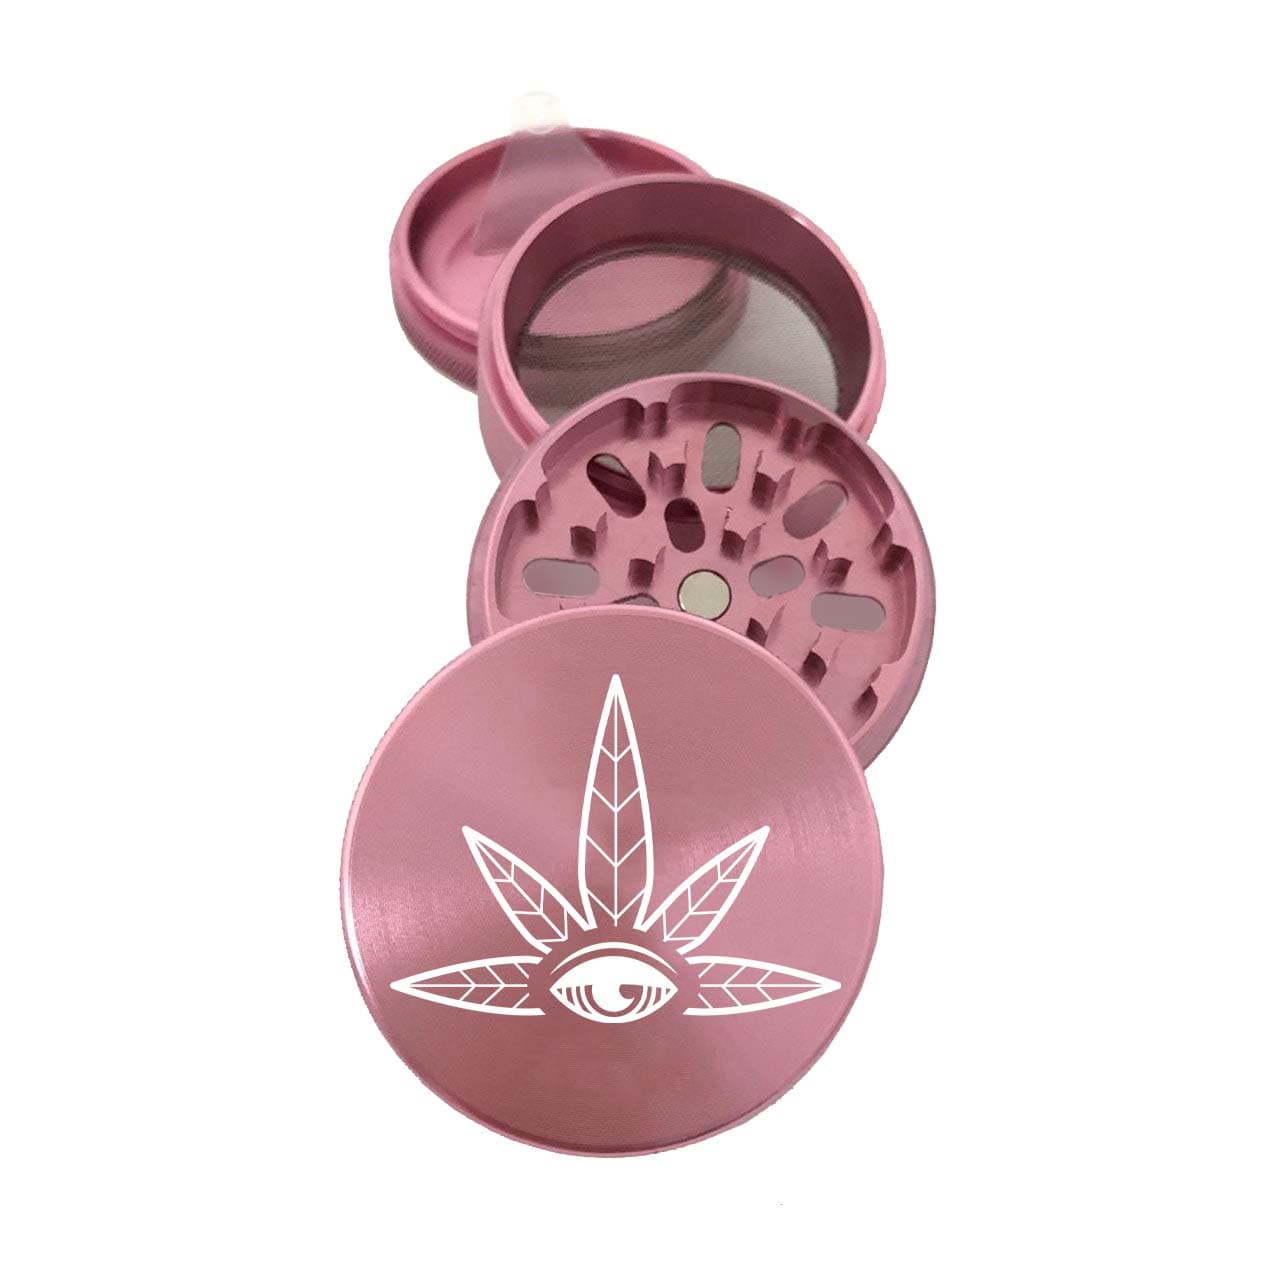 The High Culture HERB 51mm Pink Grinder